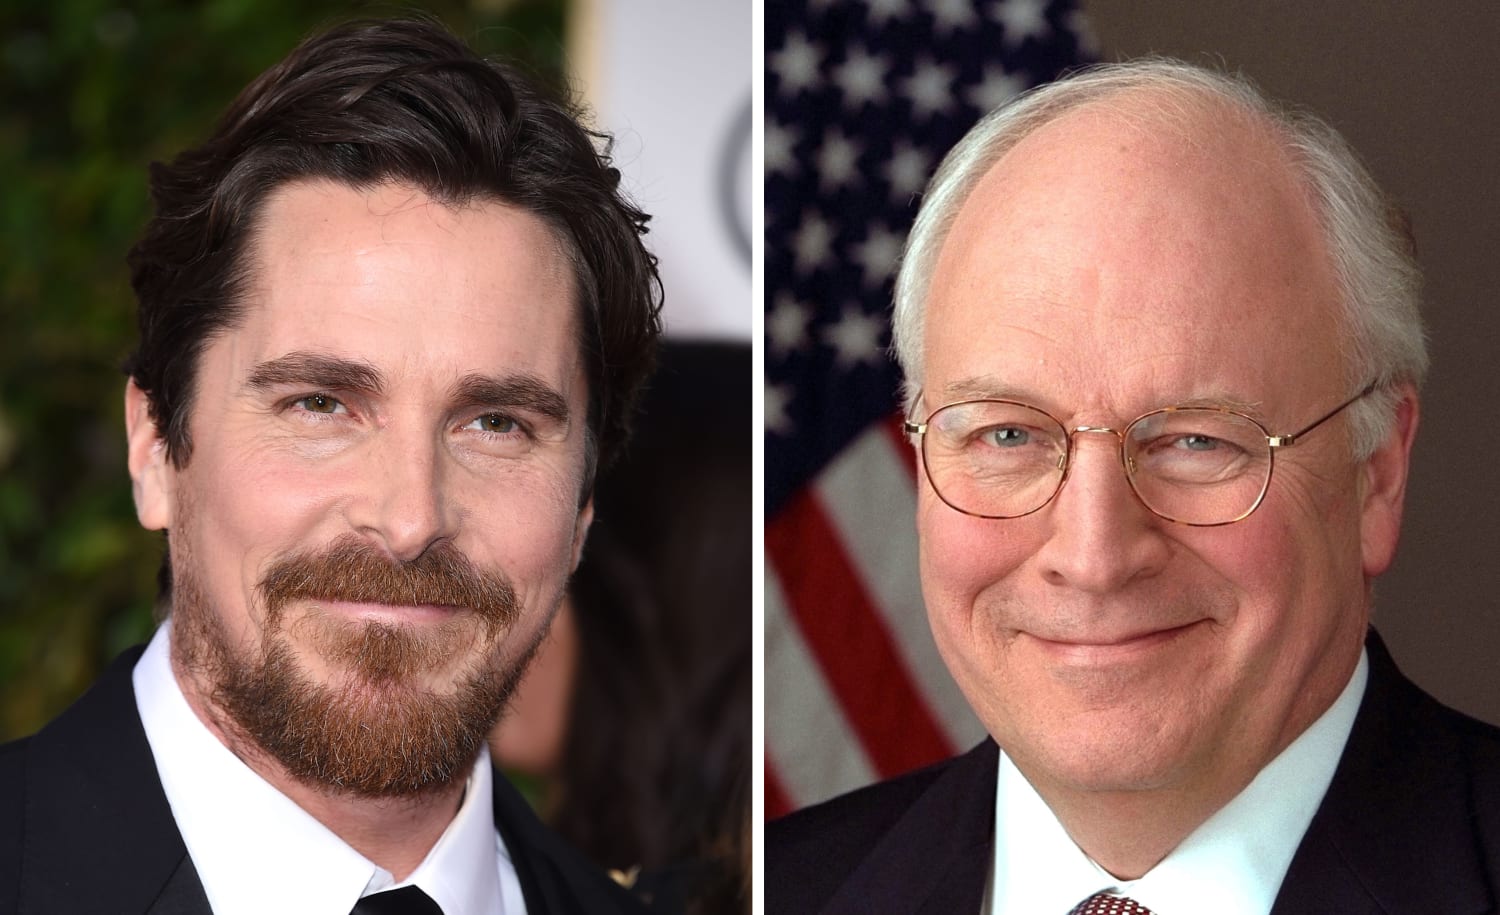 Bale plays dick cheney